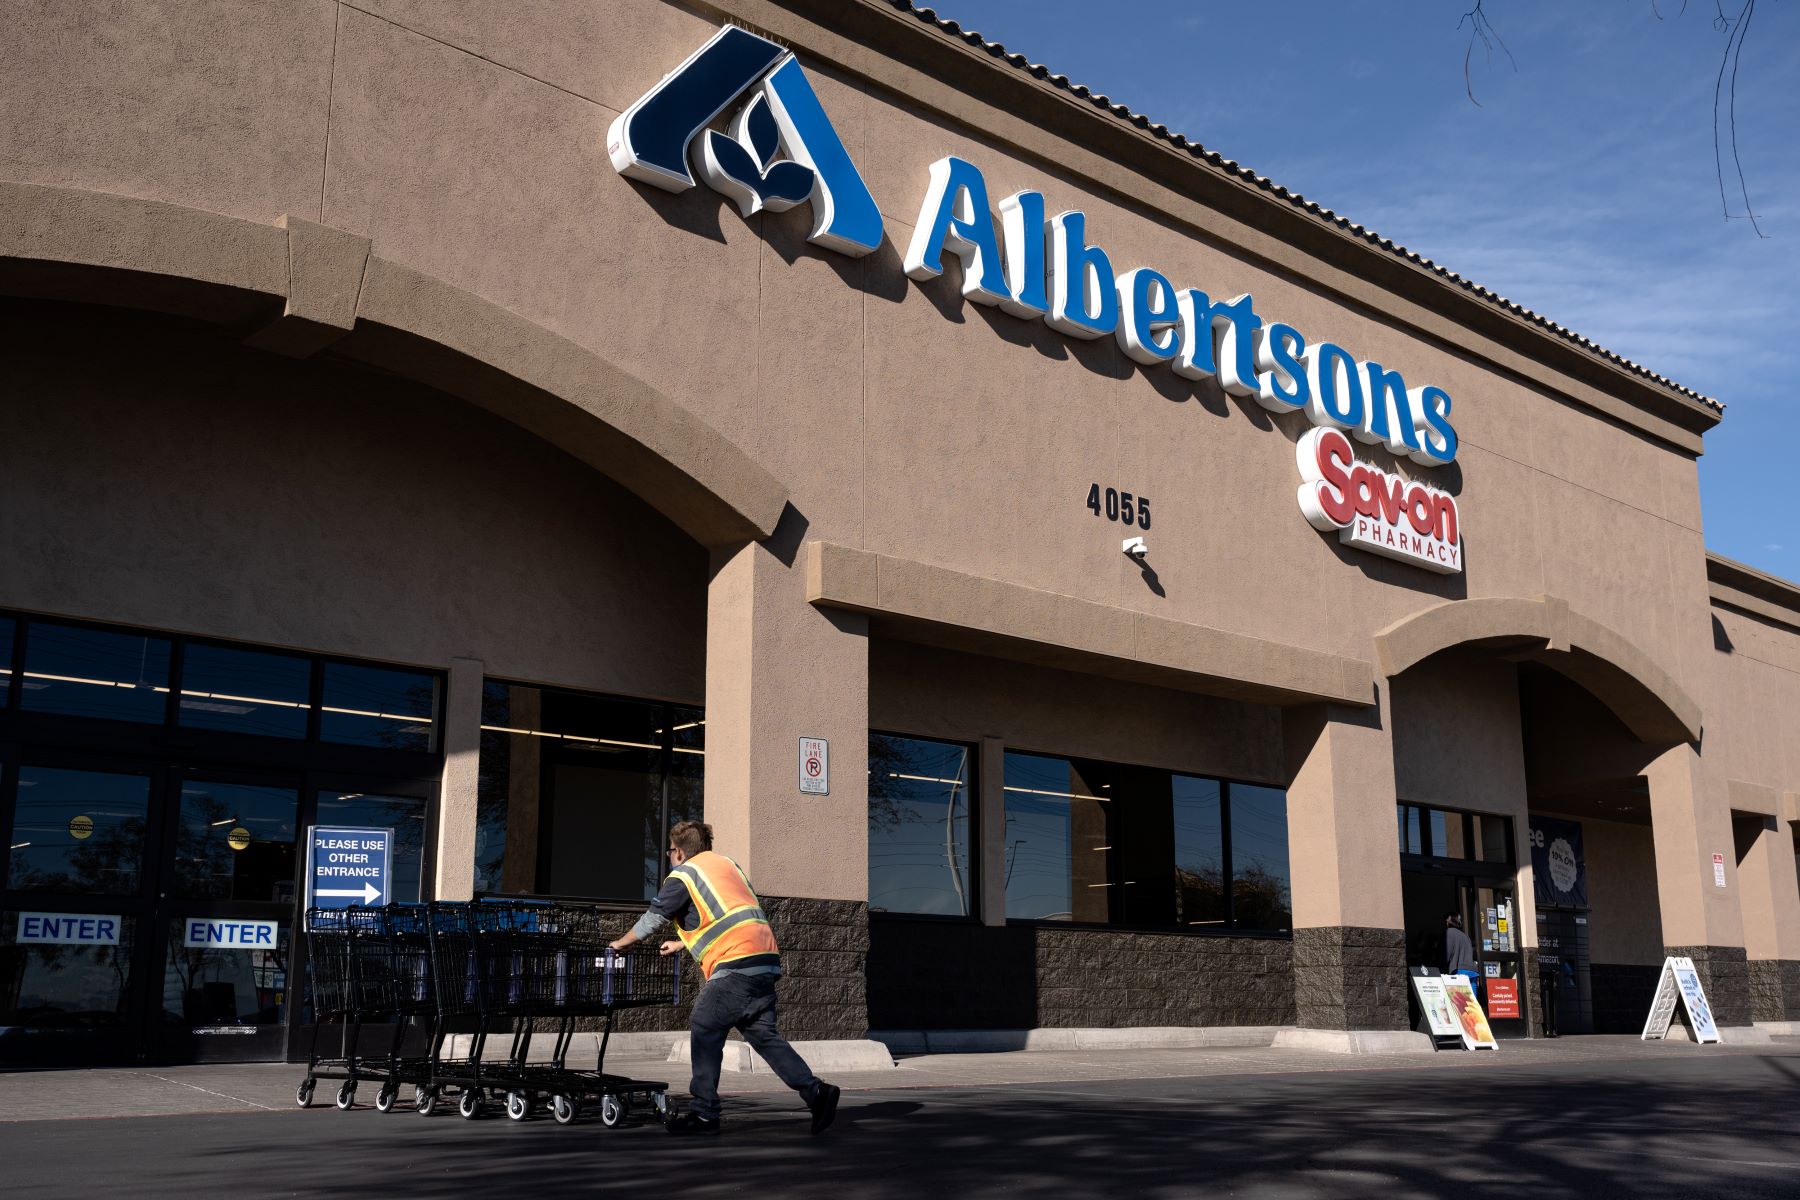 An Albertsons supermarket store located in in Las Vegas, Nevada